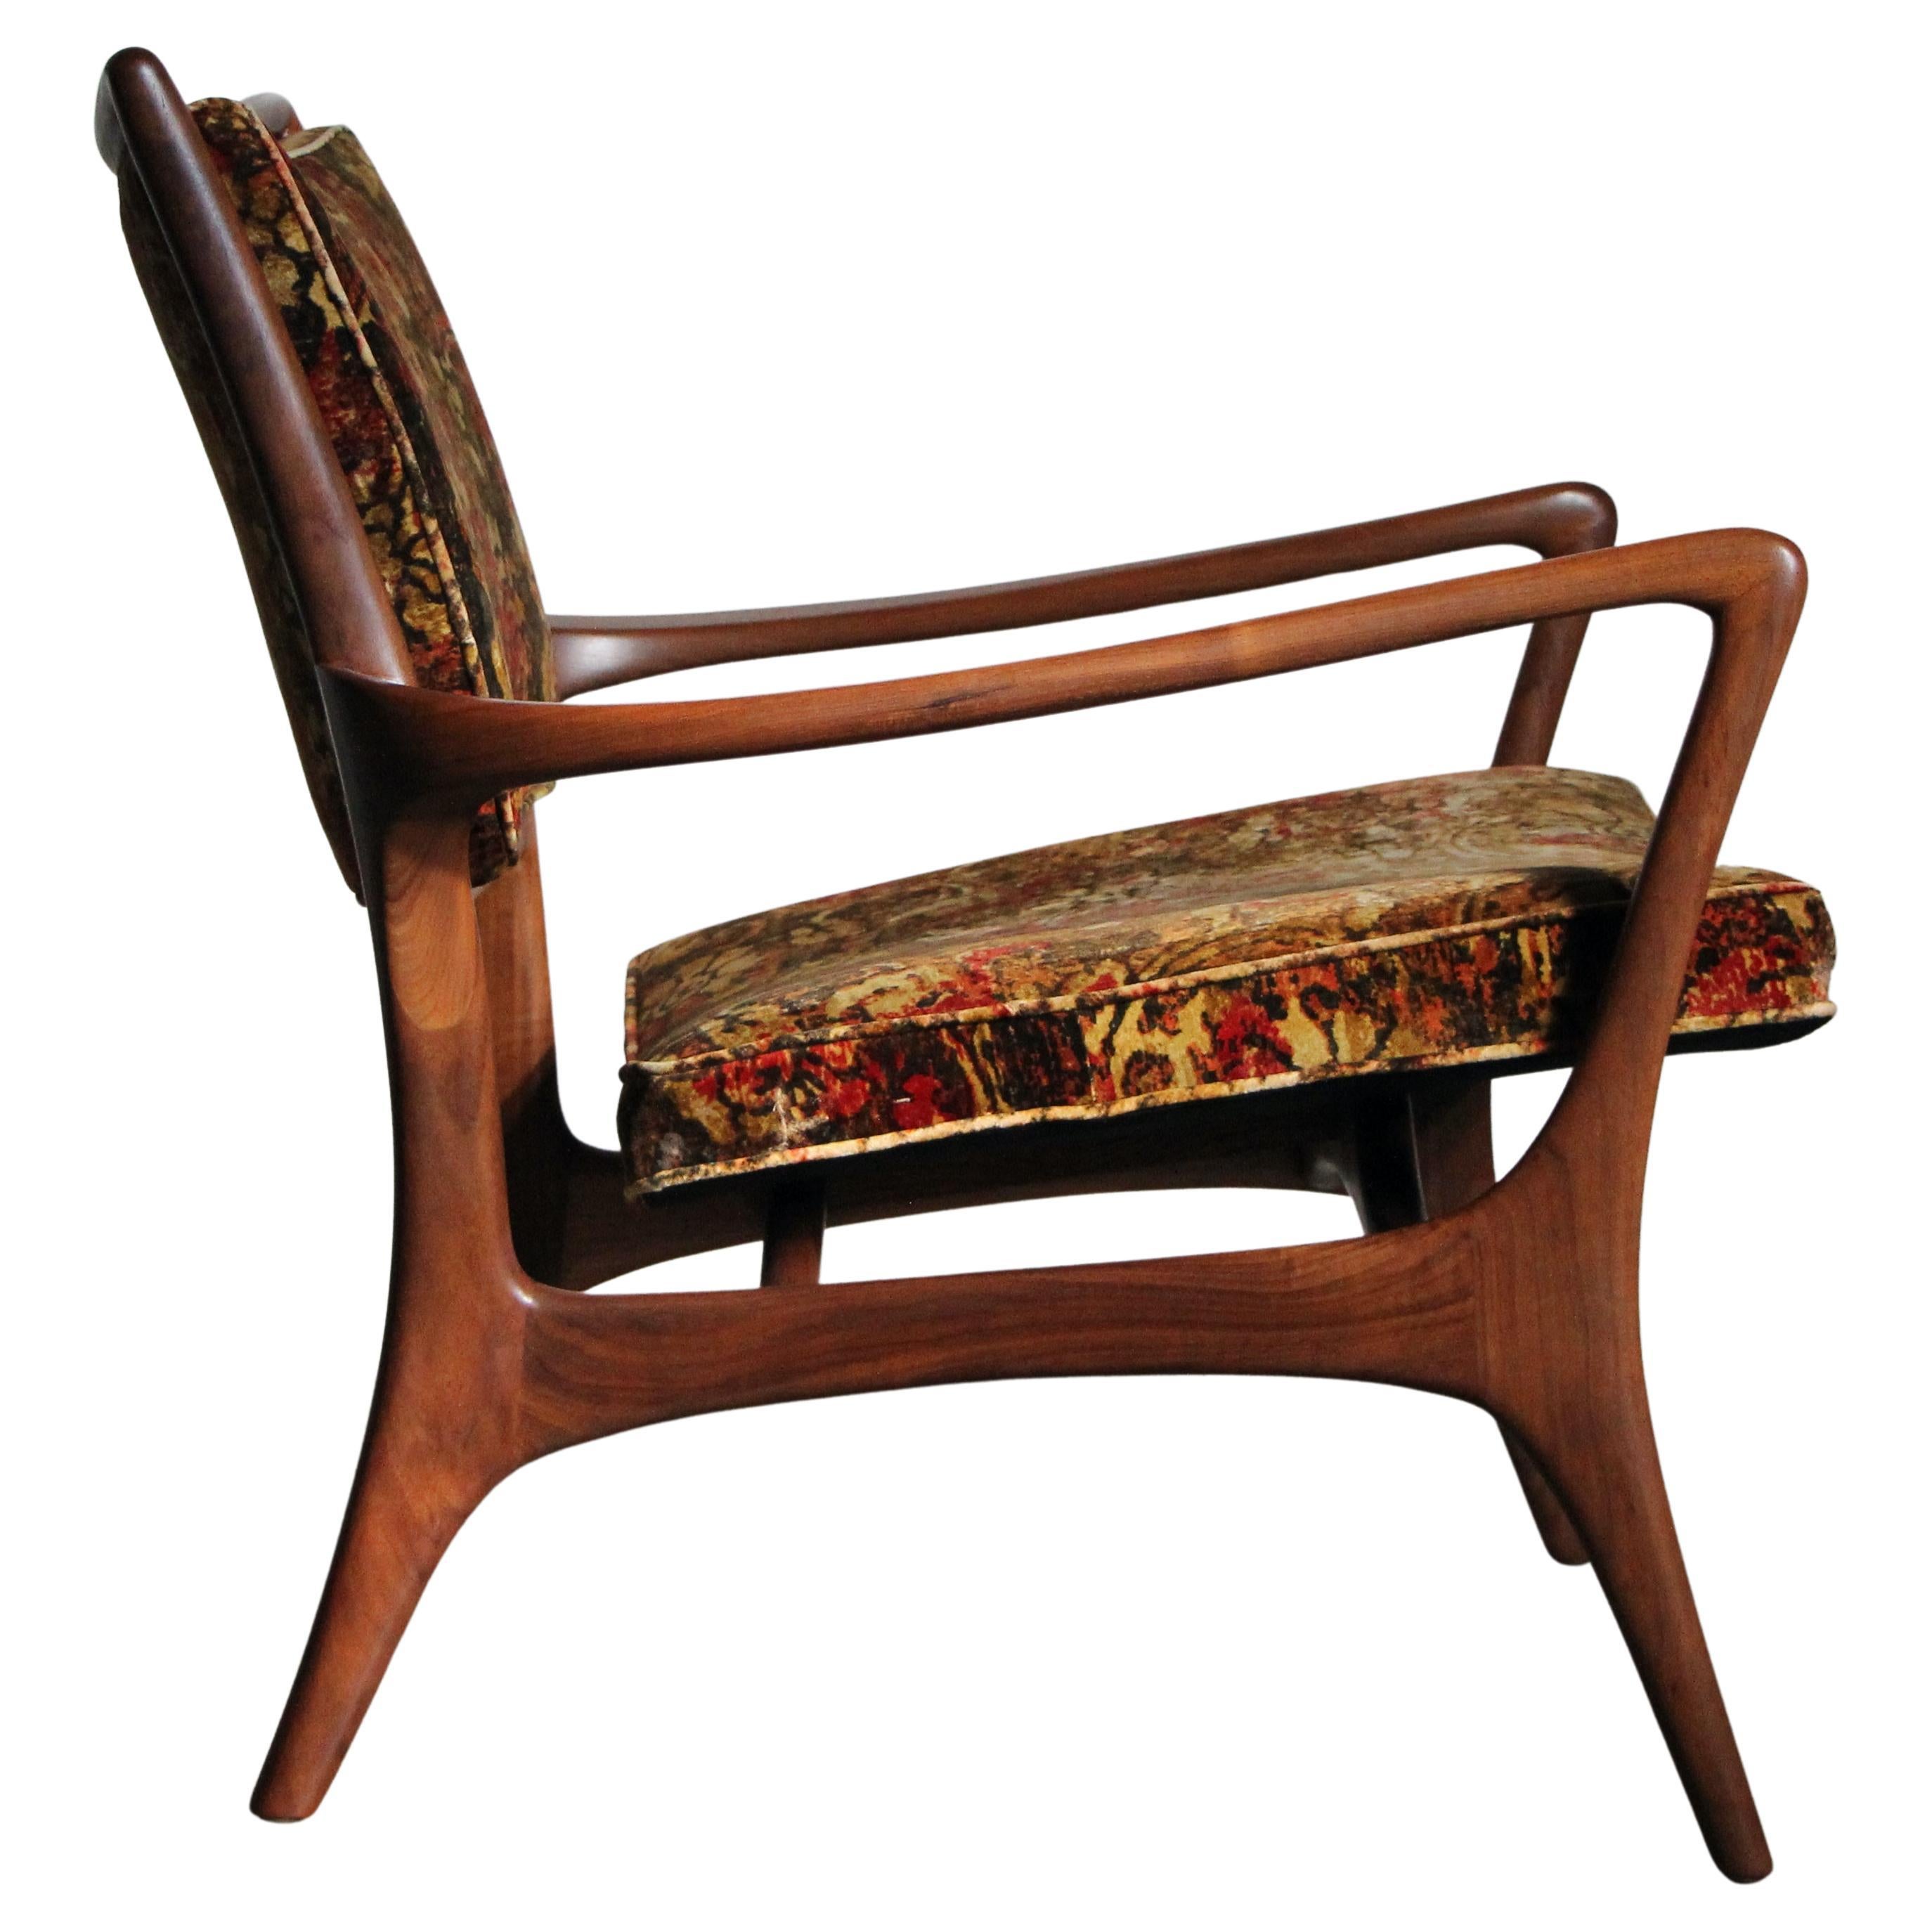 Very Rare Model 175-C Sculptured Lounge Armchair by Vladimir Kagan, c 1950s For Sale